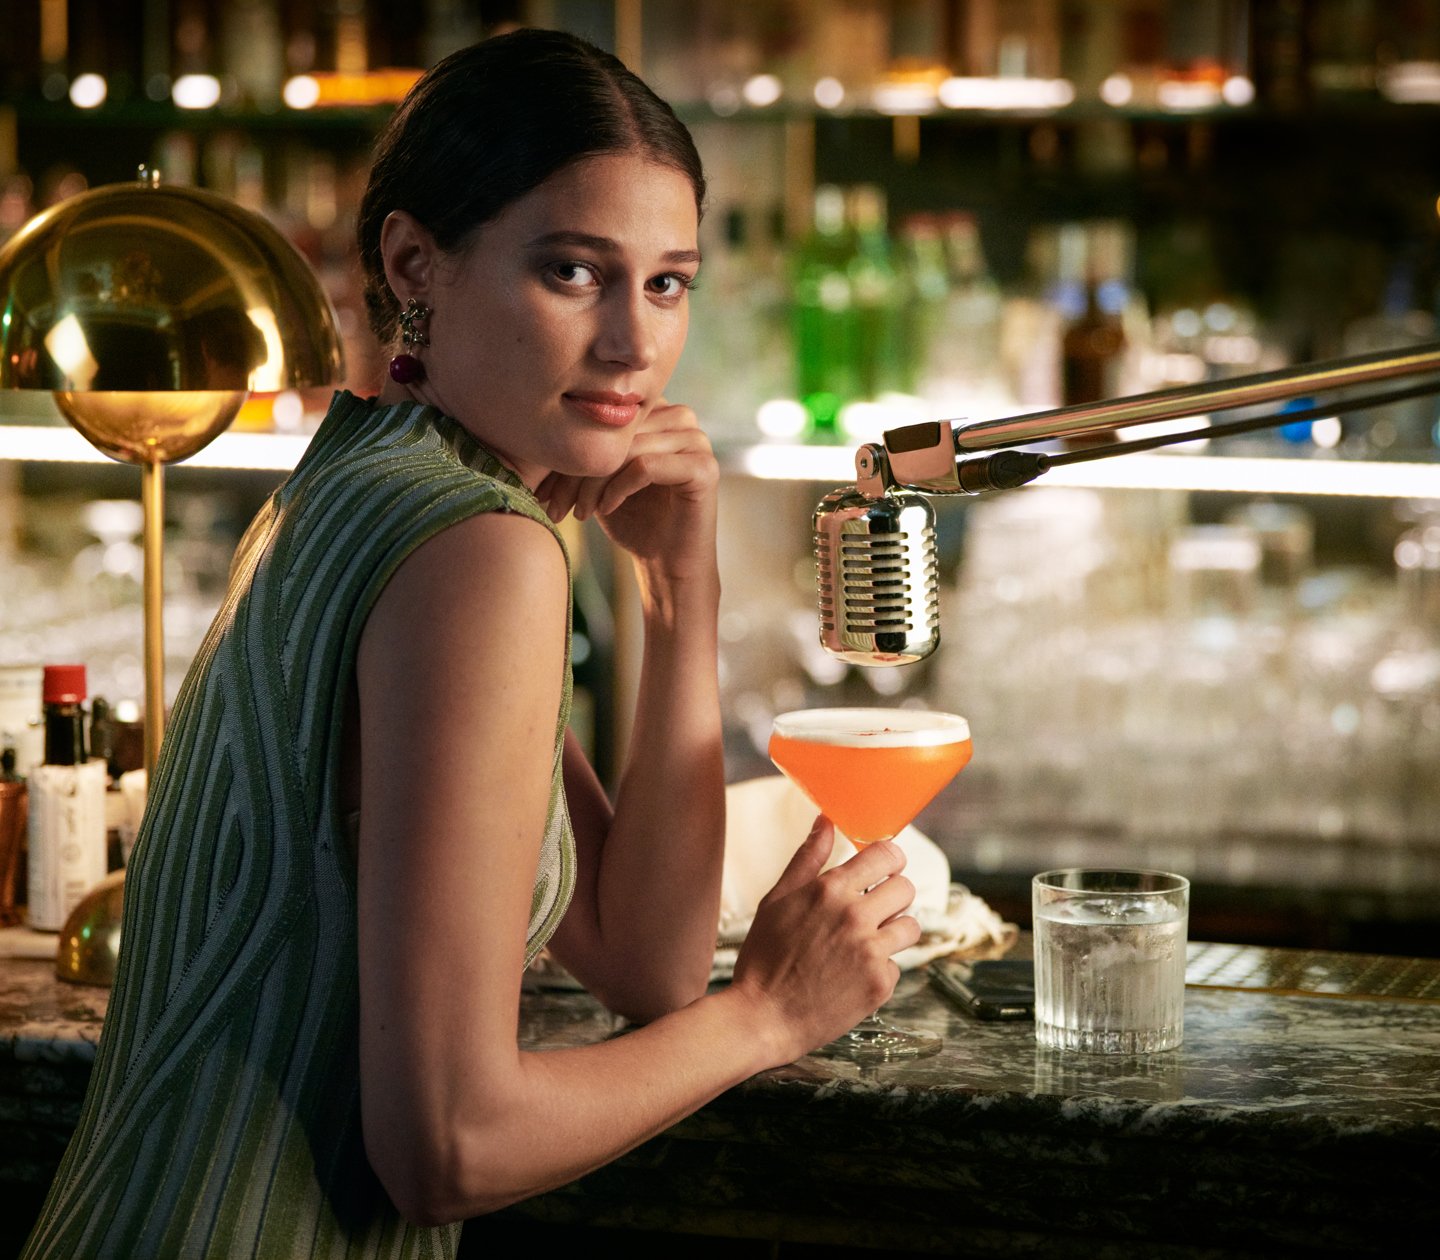 Woman in green dress sitting at bar with orange drink in hand and microphone over